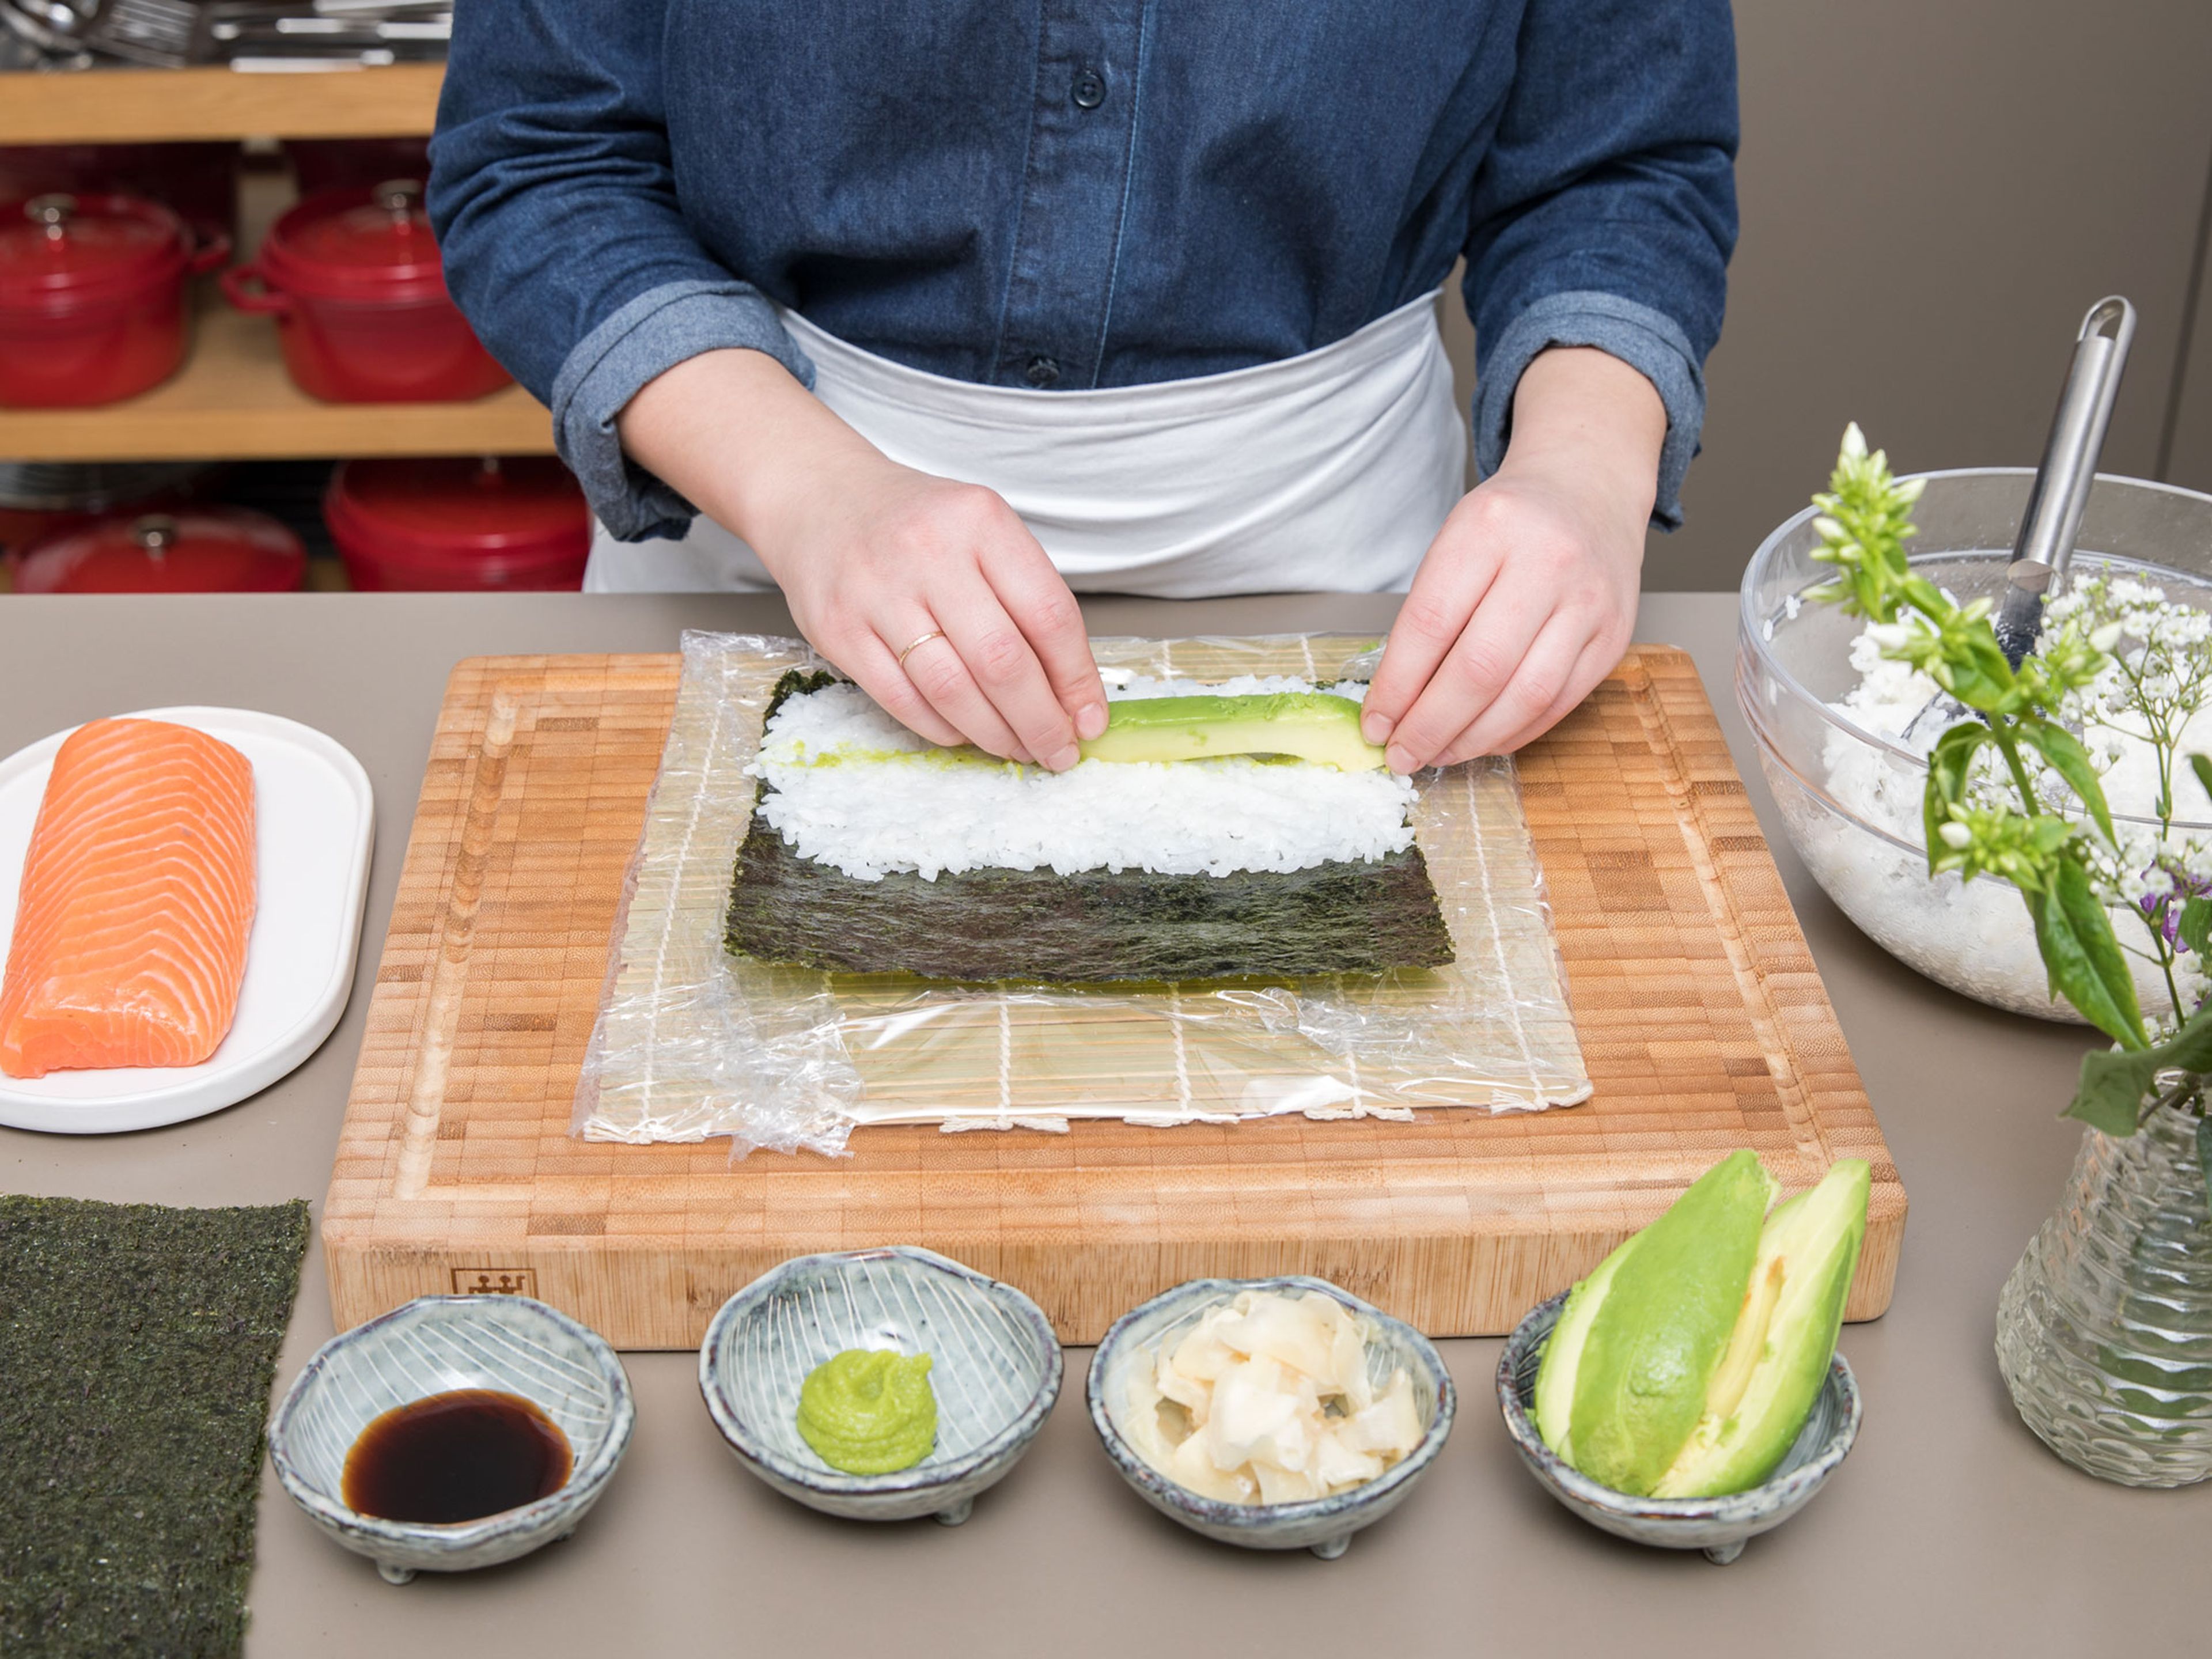 For avocado maki, slice avocado. Wrap sushi mat in plastic wrap and place a nori sheet on top. With damp hands, spread sushi rice onto the lower half of nori sheet and spread some wasabi and place sliced avocado in the center of the rice. Roll together tightly using the sushi mat and cut off overhang. Slice into equal-sized avocado maki.